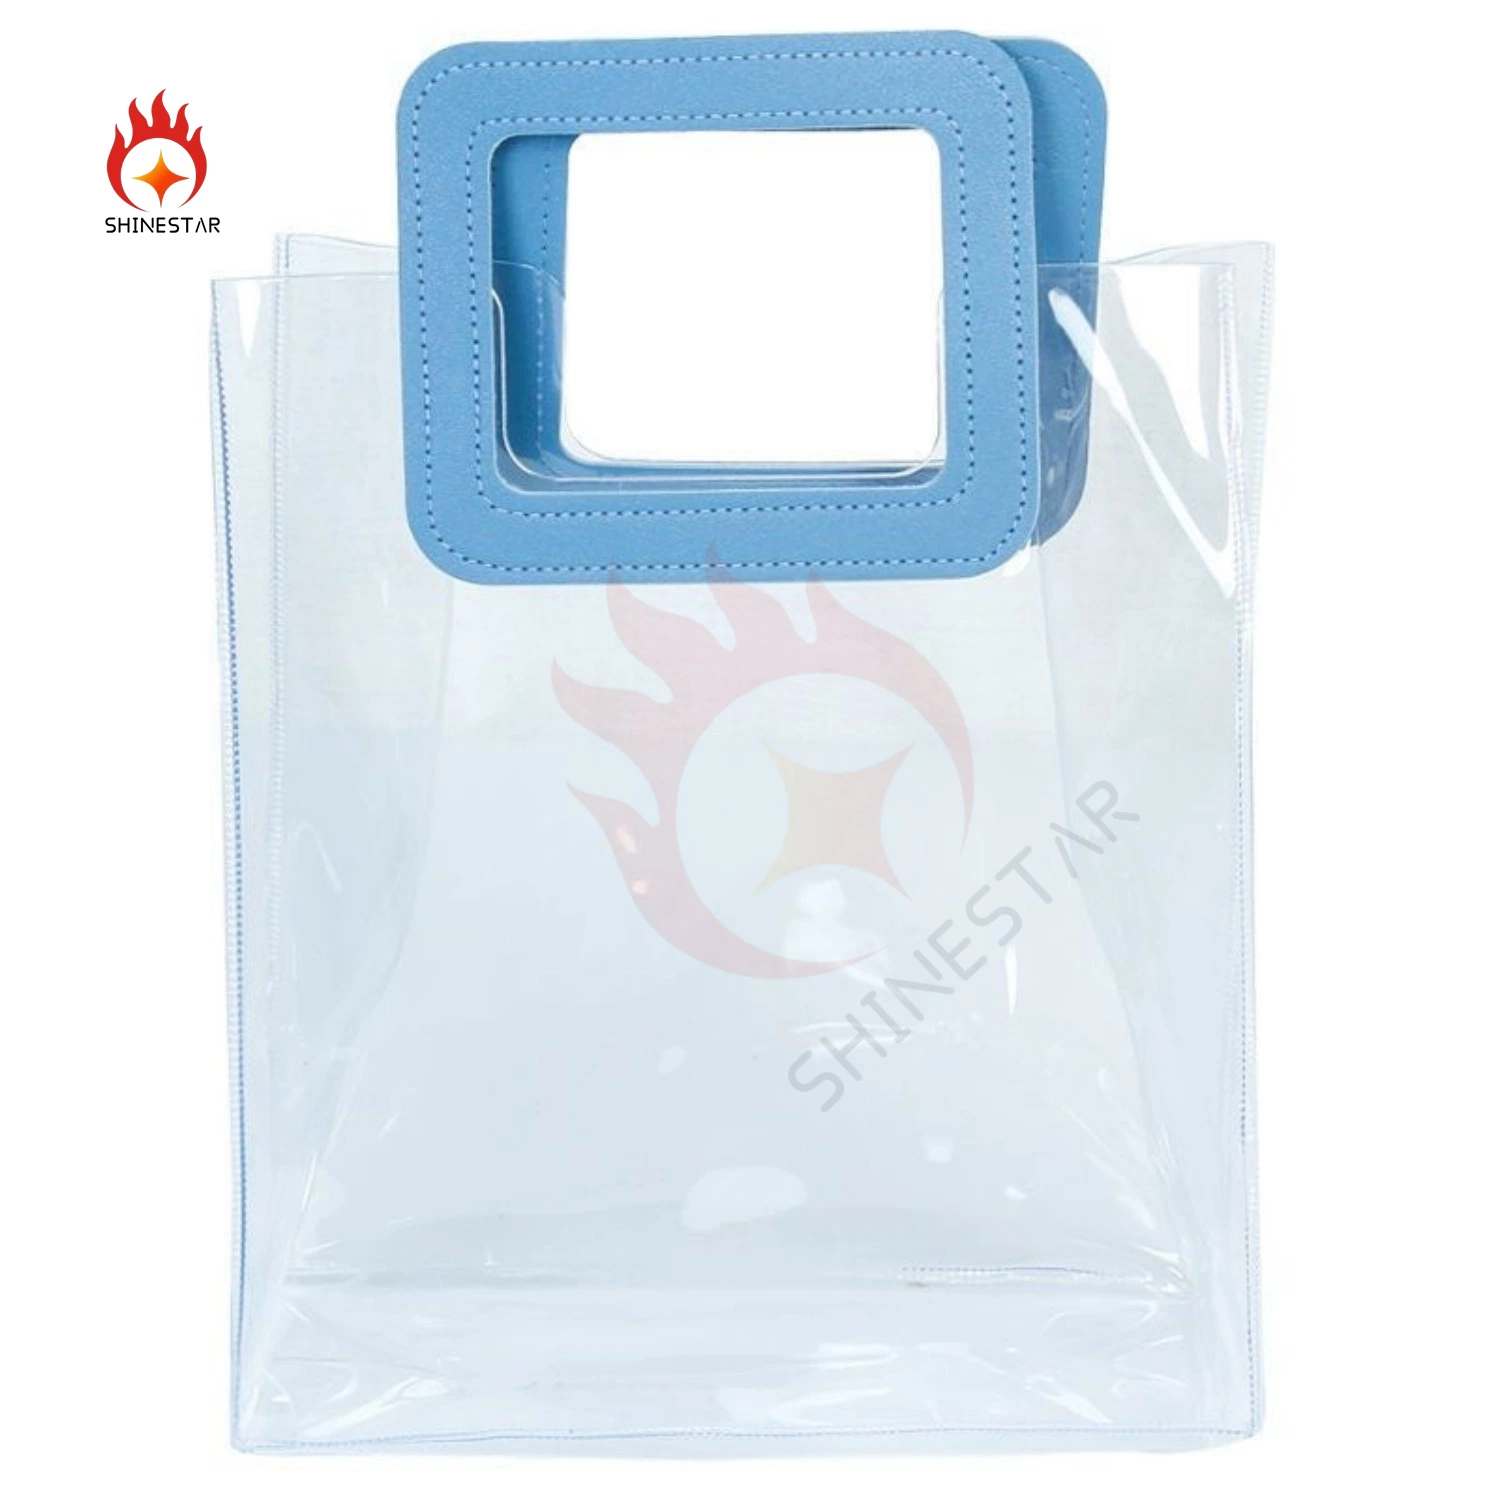 Transparent PVC Hand Stand up Gift Special Handle Handbag Clear Packaging Bag